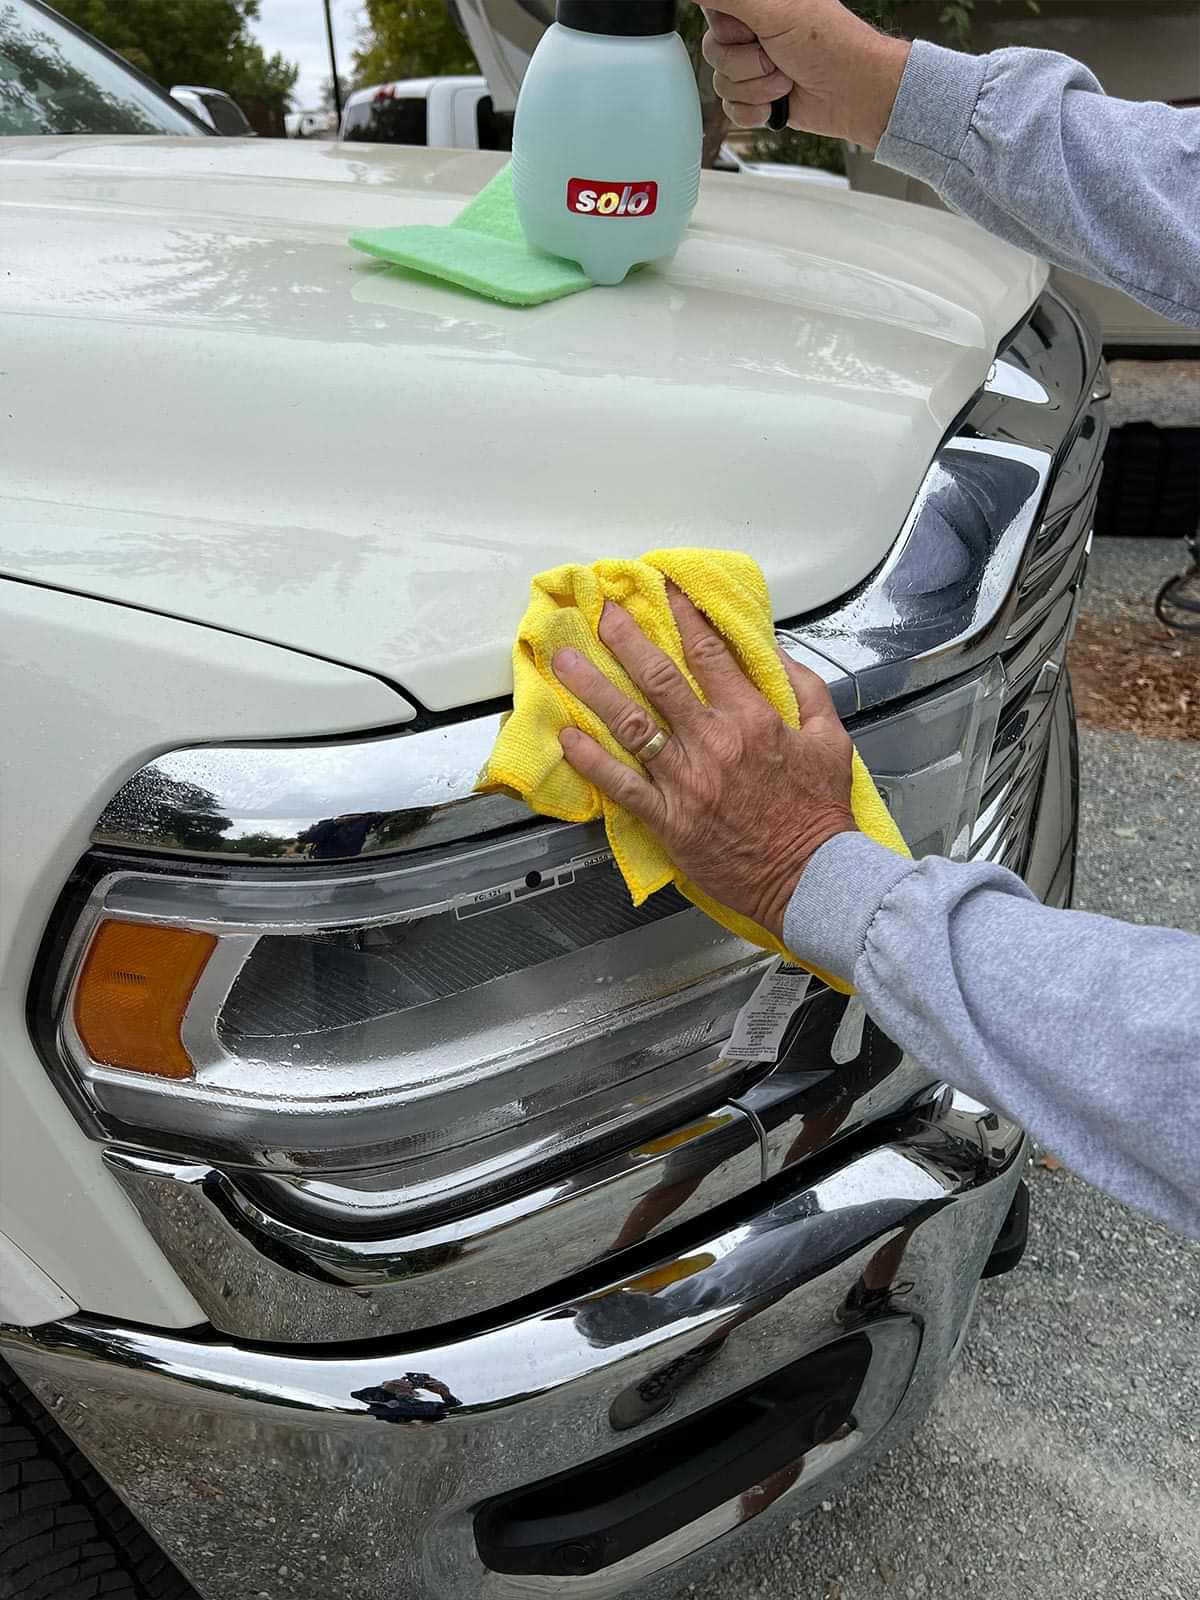 with the vehicles bugs cleared, a microfiber towel is used to dry the newly polished area